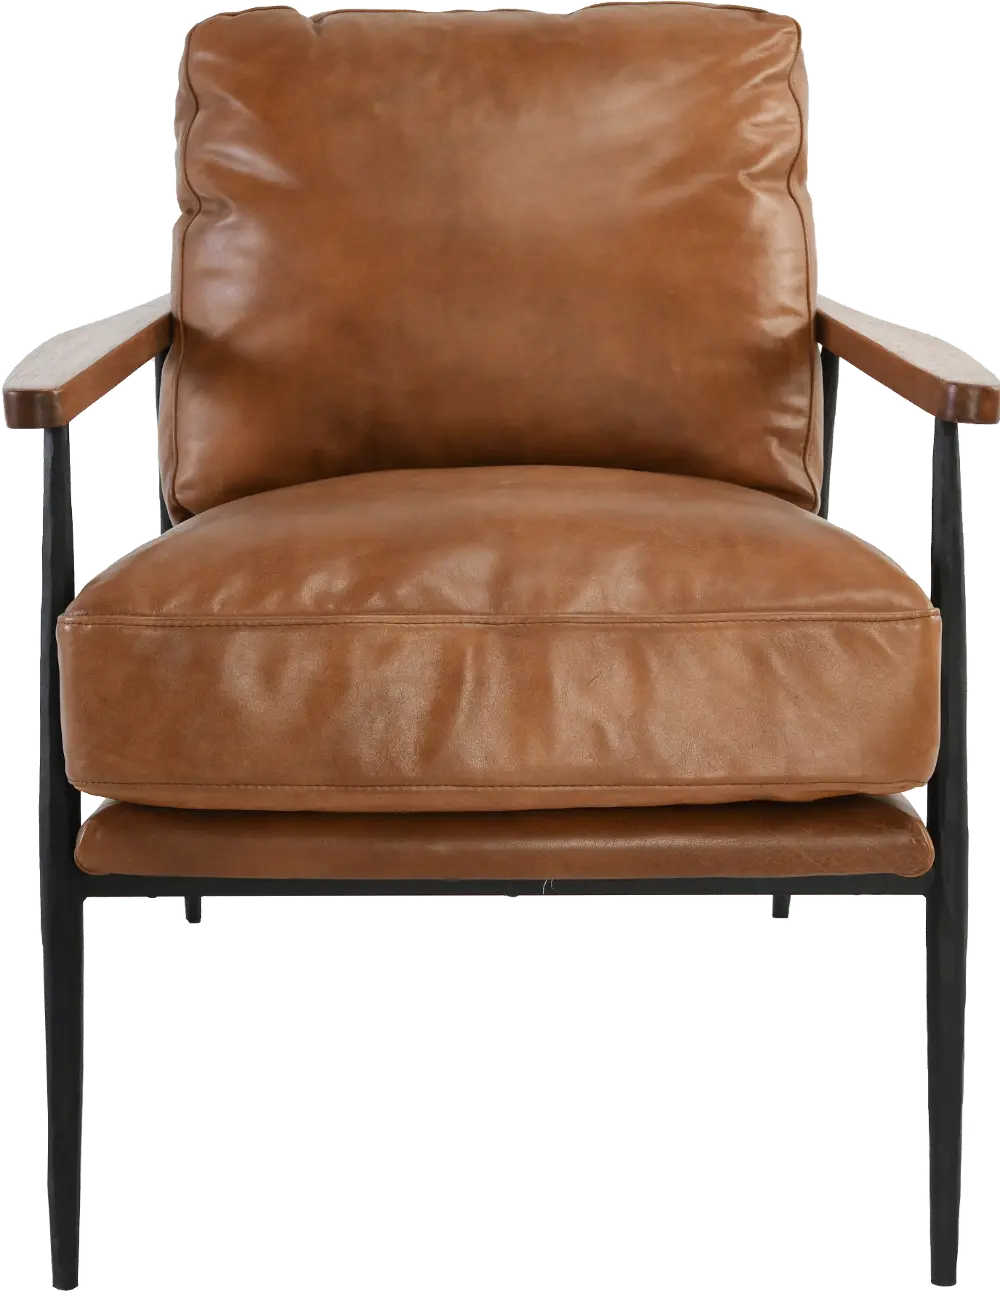 Christopher Mid Century Modern Tan Leather Club Chair-1